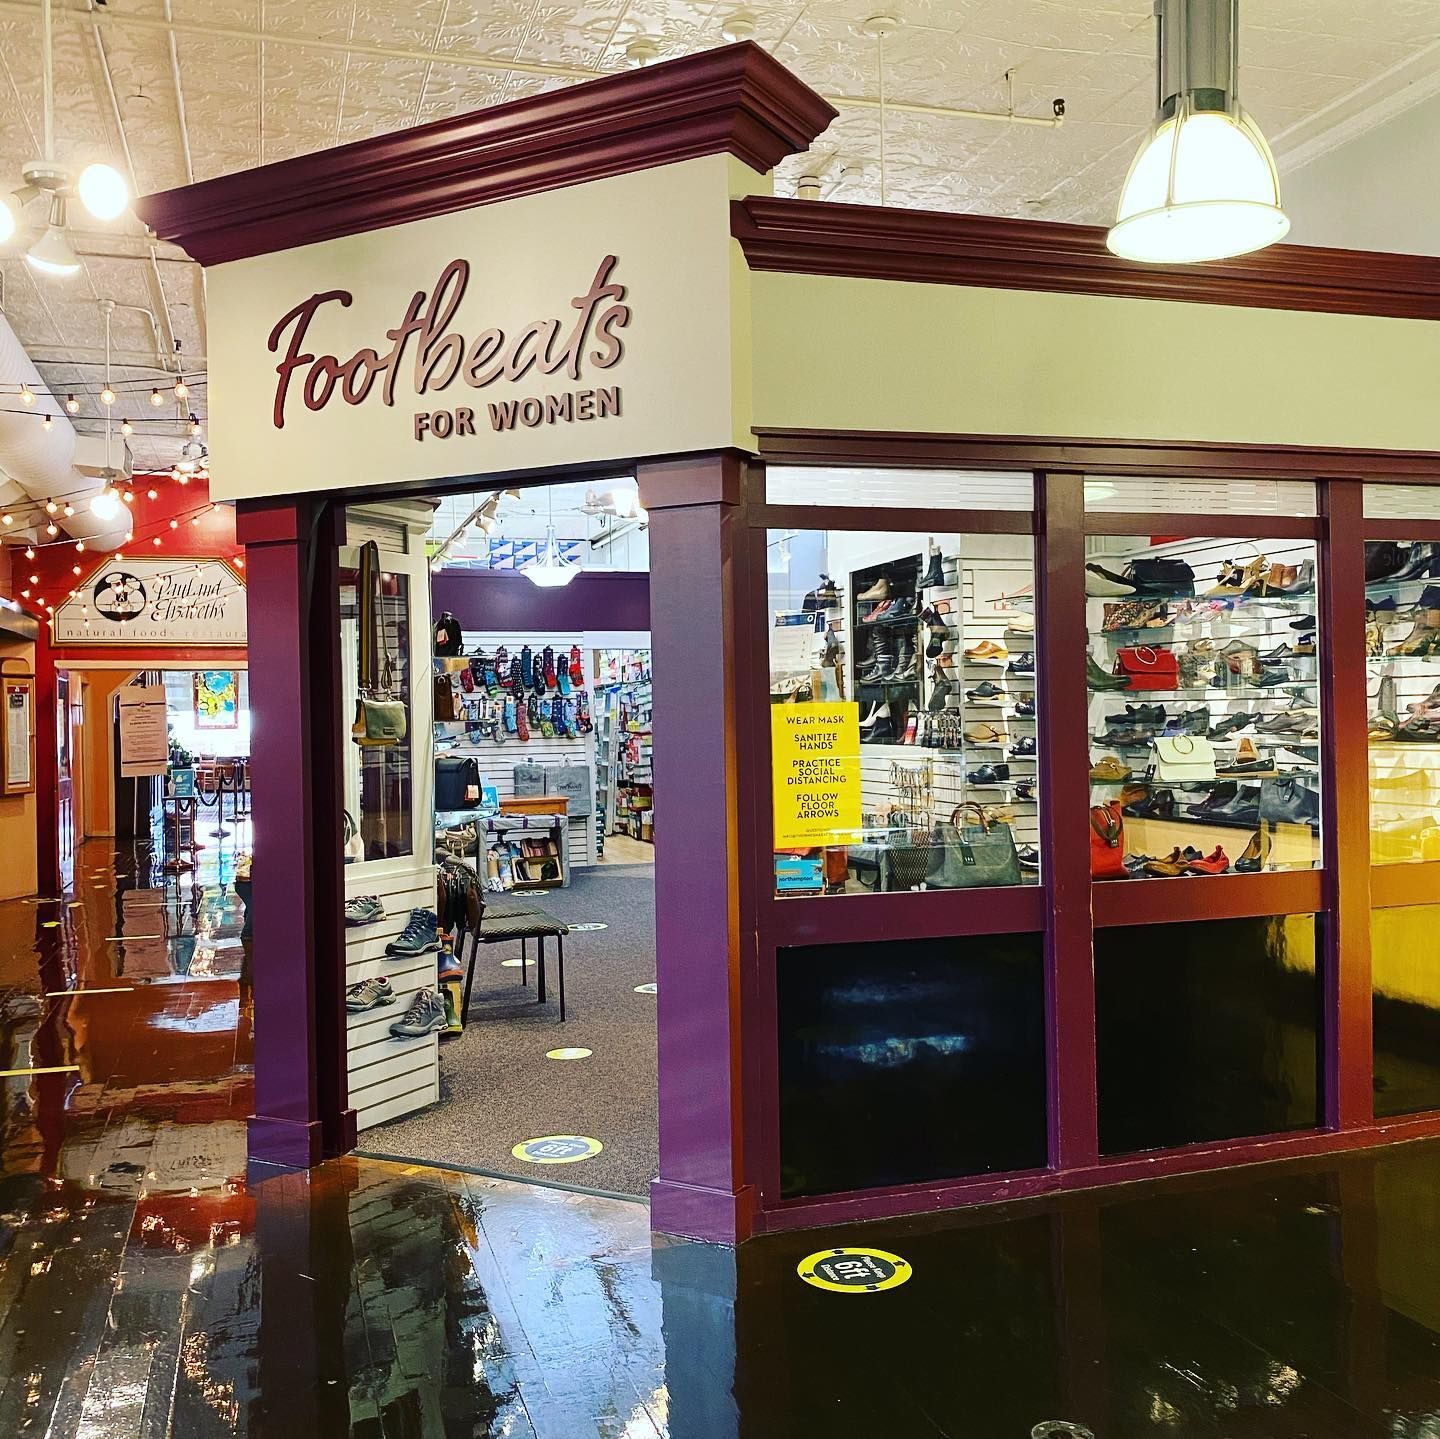 Footbeats for Women offers beautiful, high quality footwear in Thornes Marketplace Northampton MA